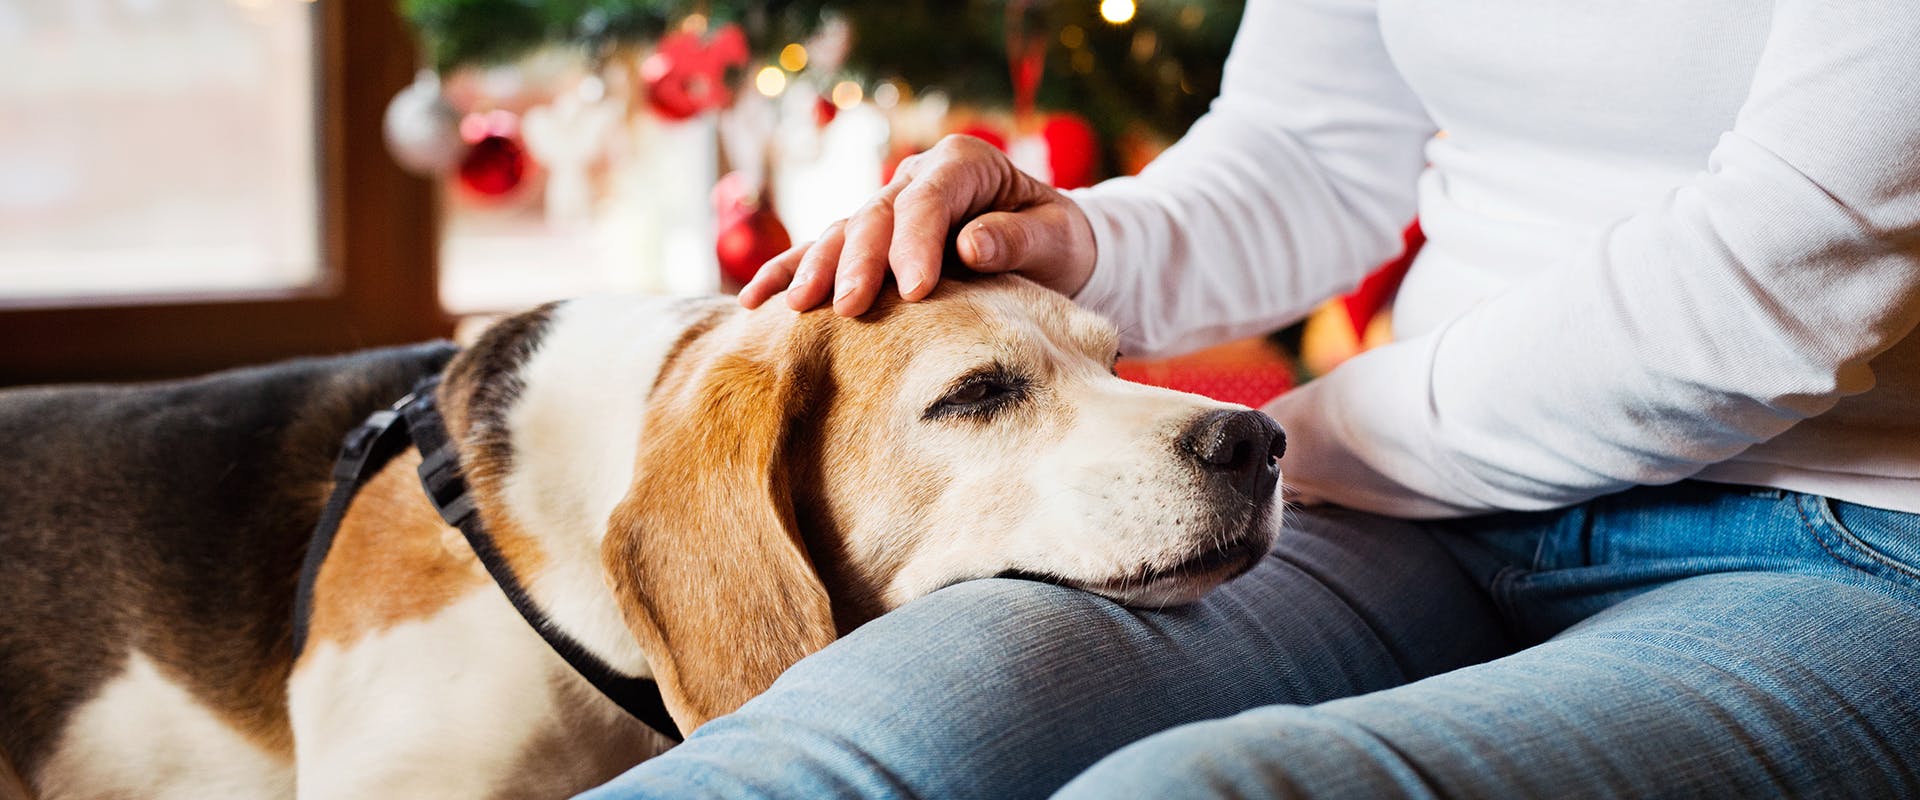 A dog standing with its head resting on a person's lap, a Christmas tree visible in the background